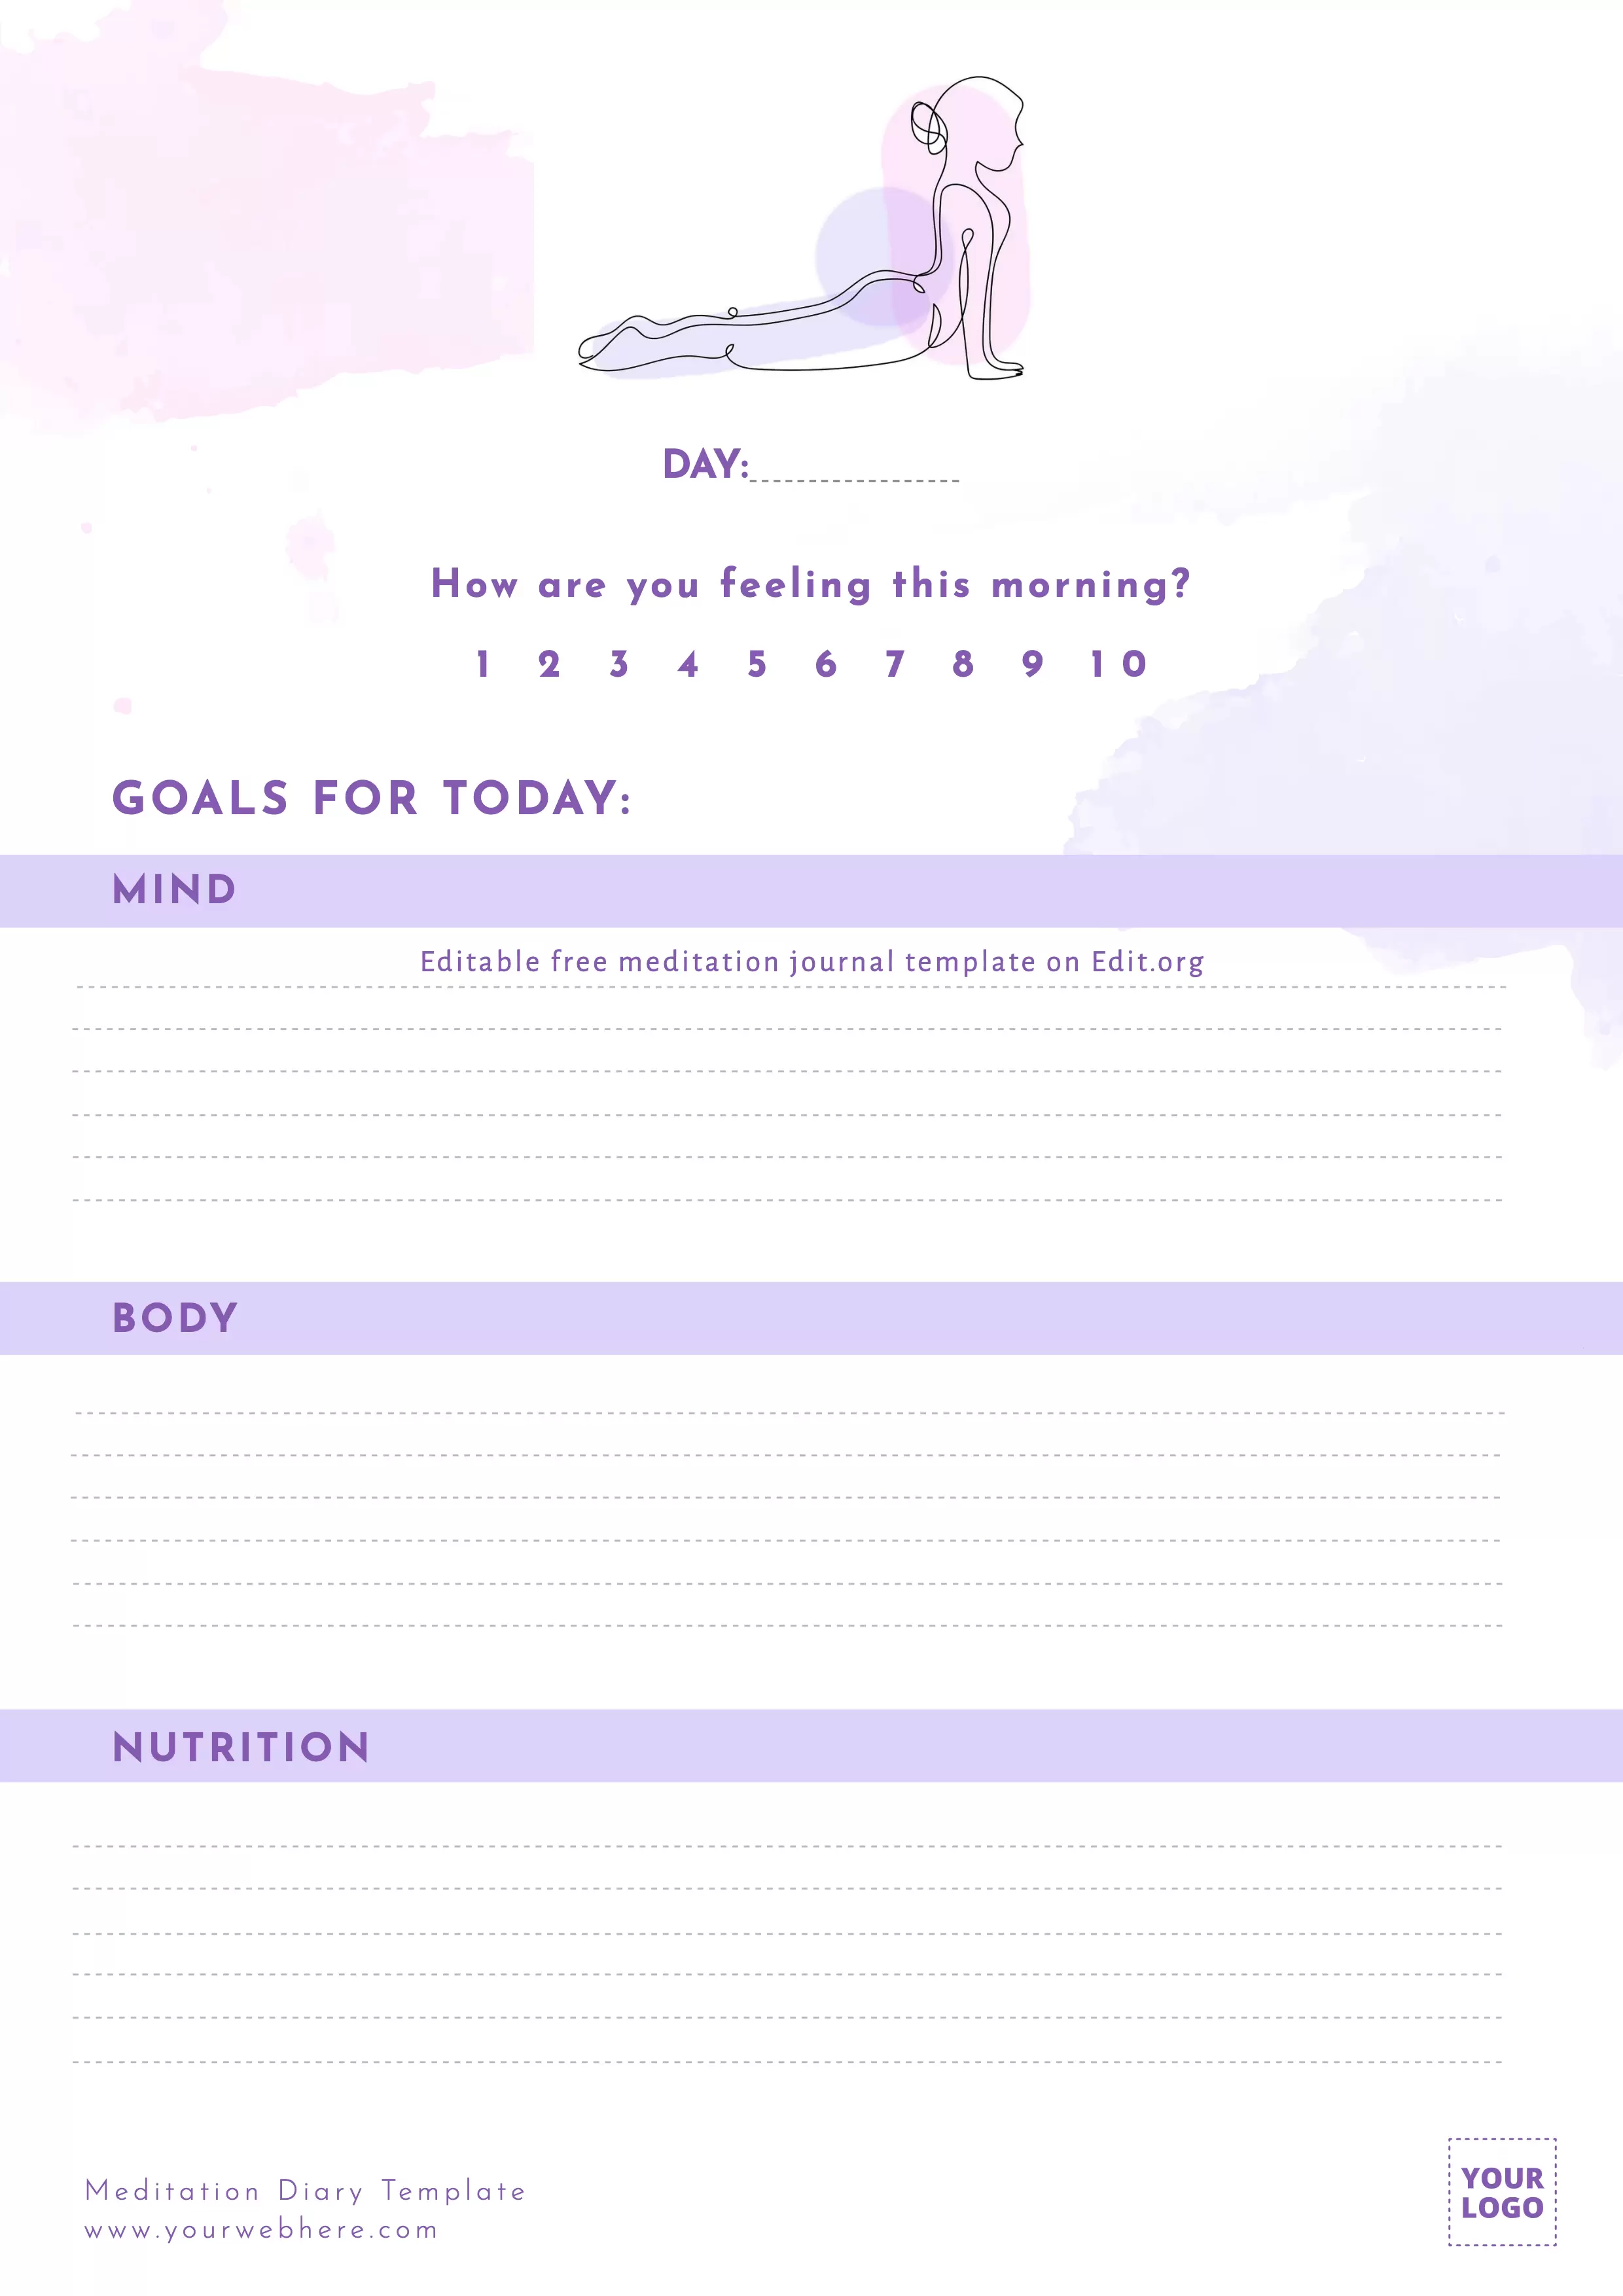 Printable Meditation Journal example template to customize